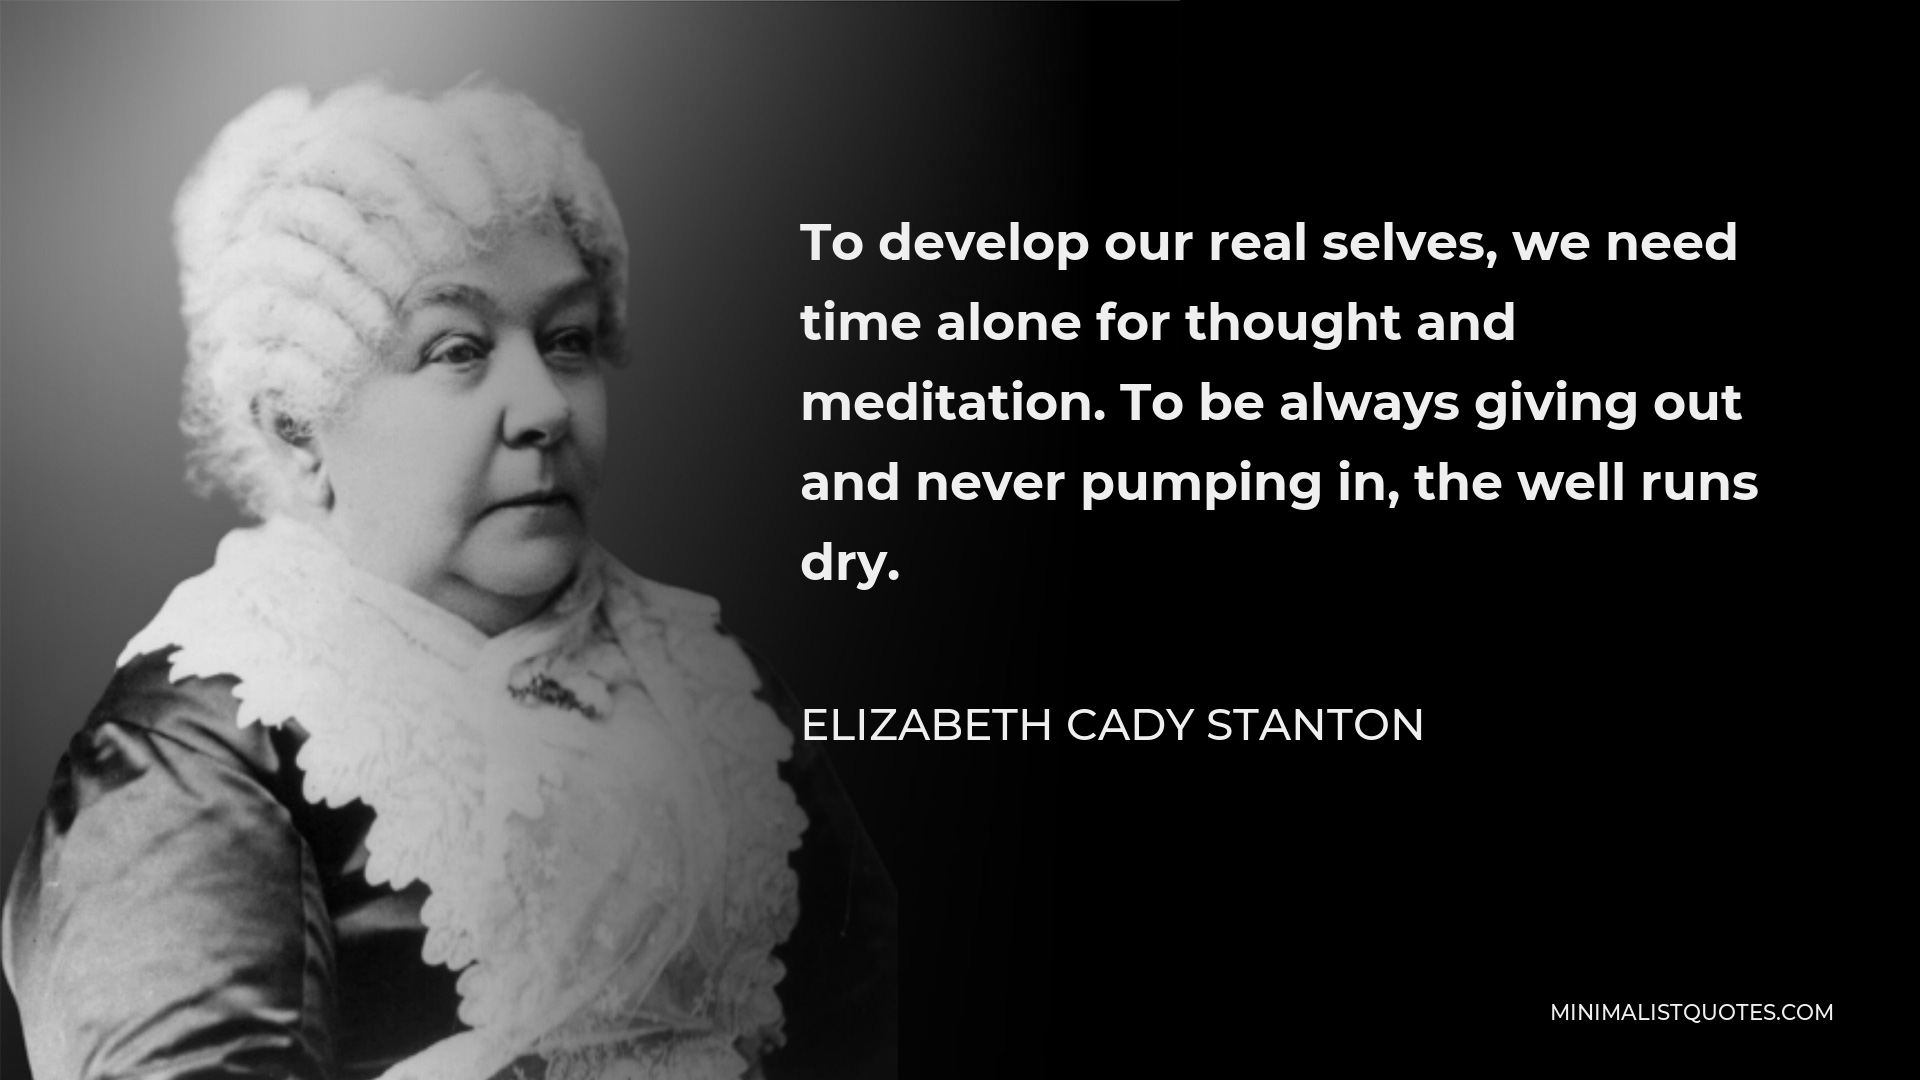 Elizabeth Cady Stanton Quote - To develop our real selves, we need time alone for thought and meditation. To be always giving out and never pumping in, the well runs dry.